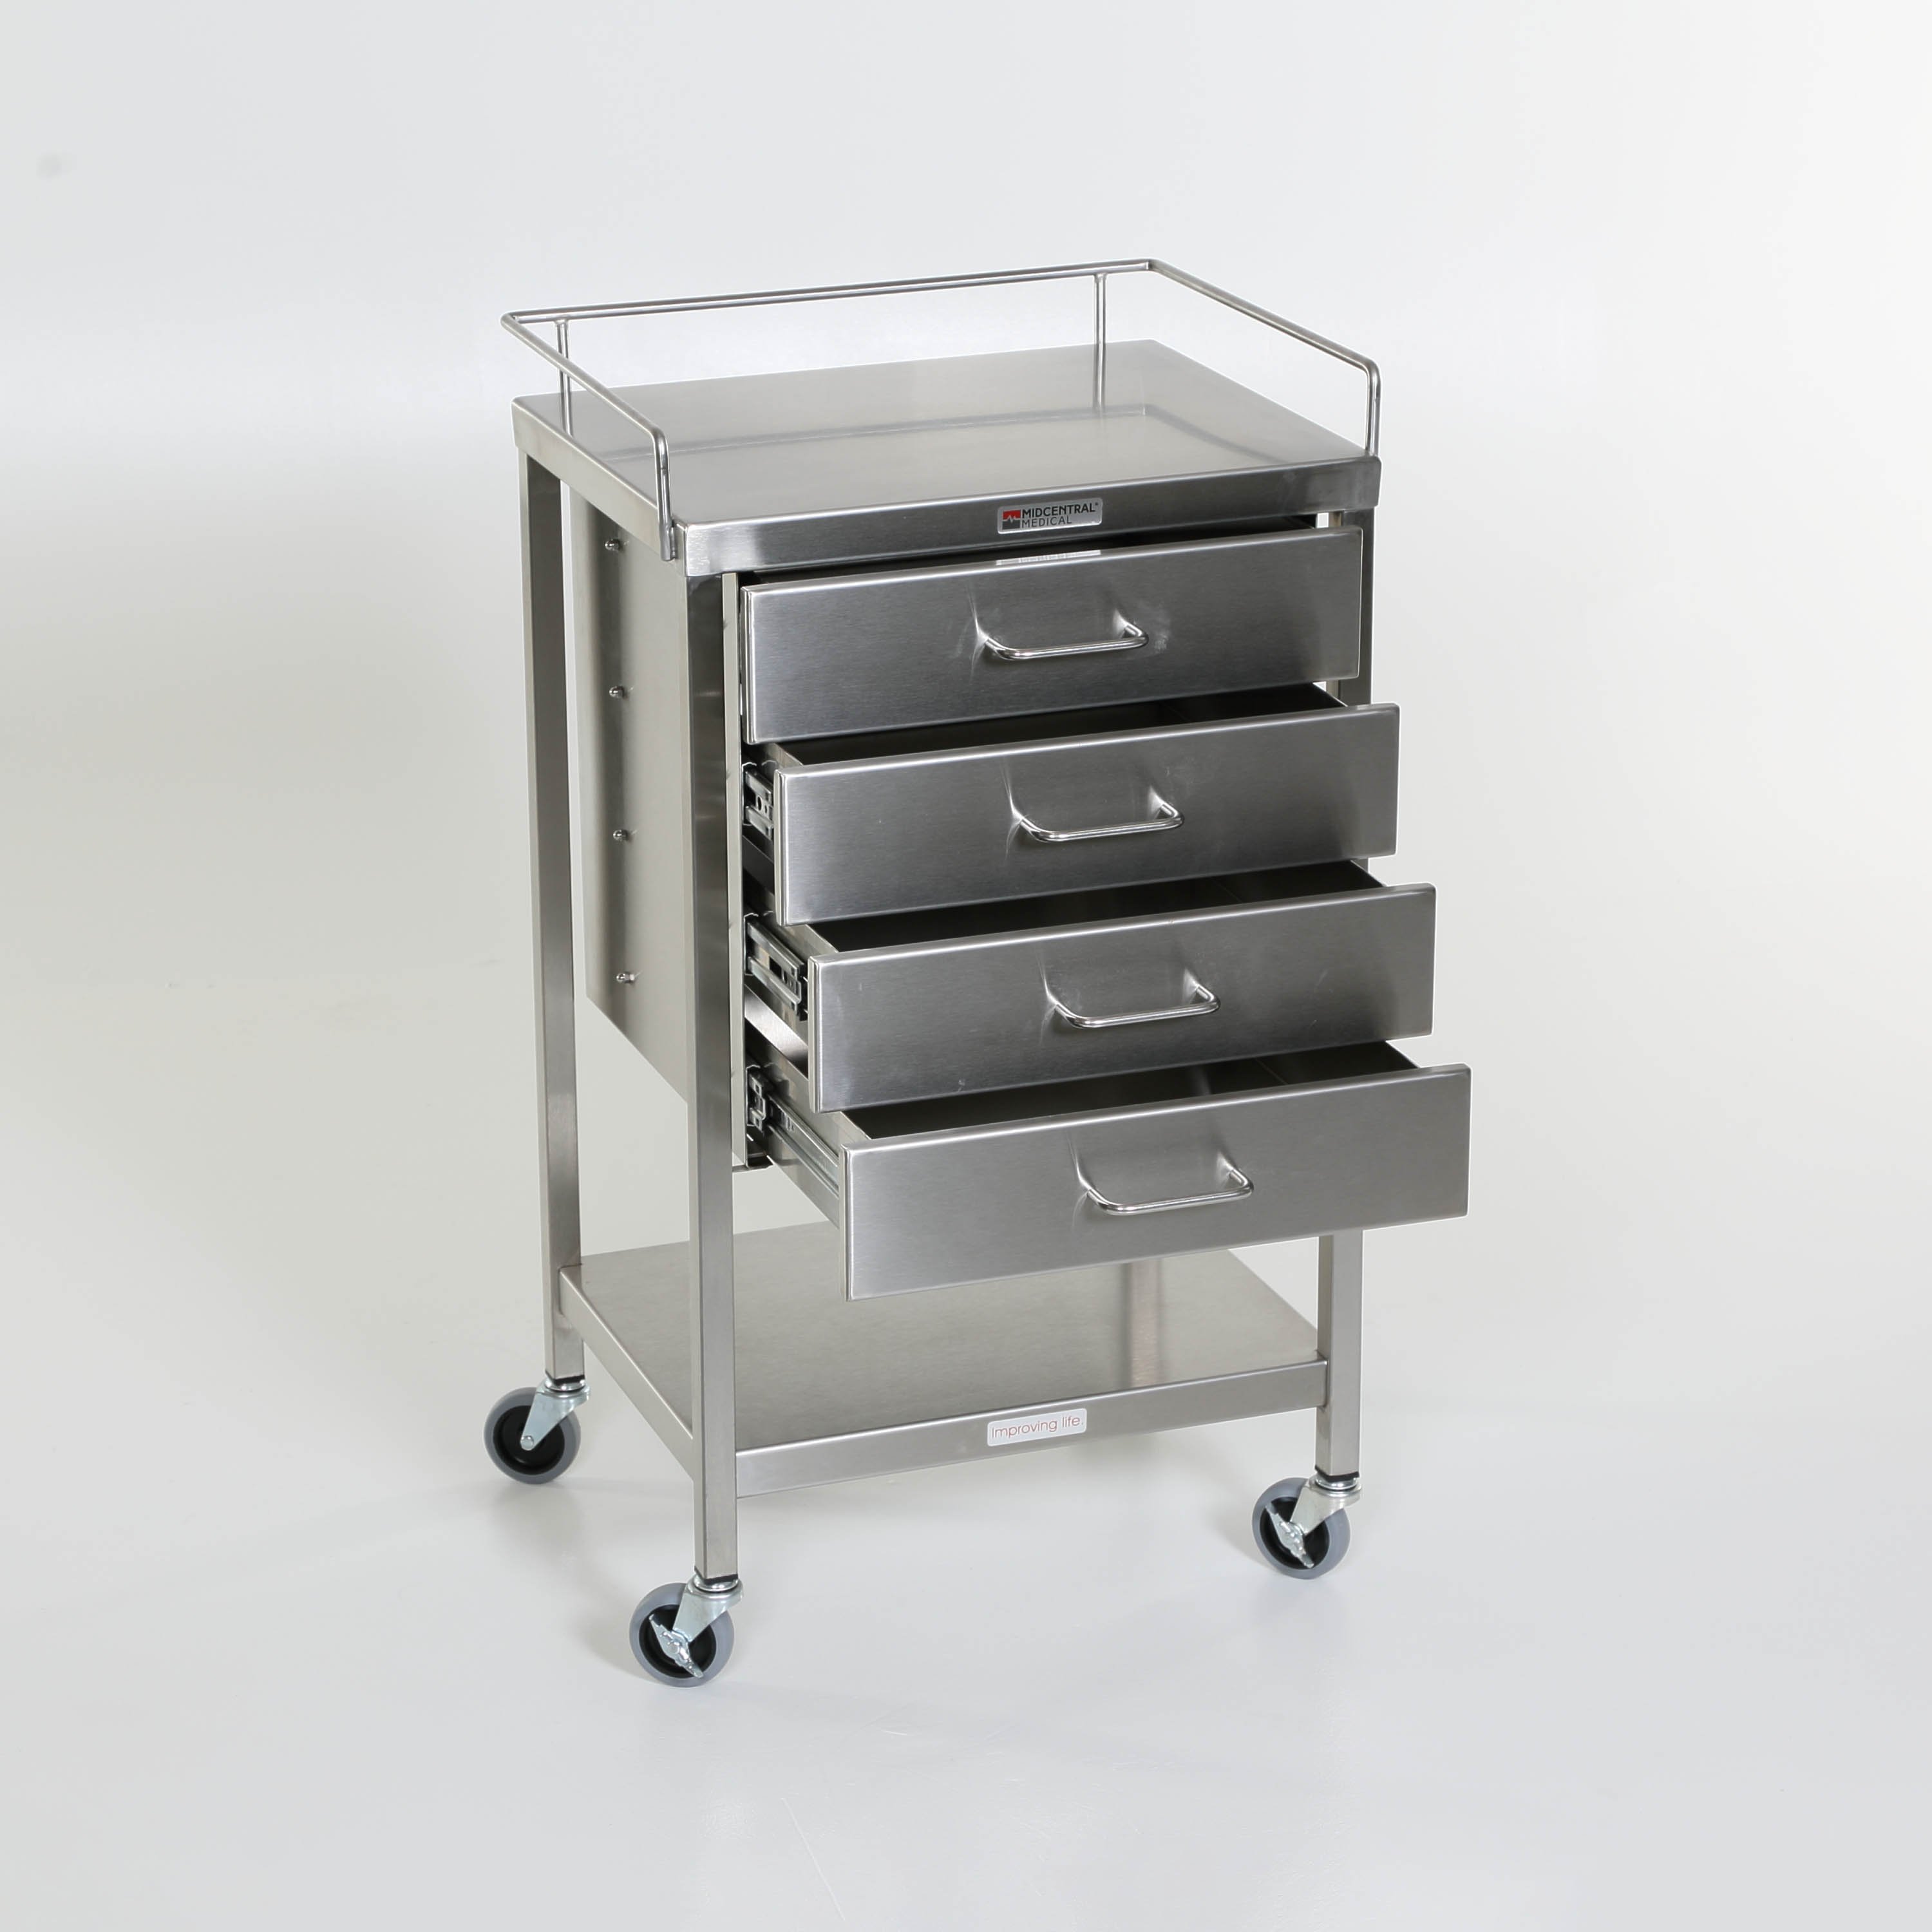 https://www.universalmedicalinc.com/media/catalog/product/cache/f176254afc5001a35a1c727280299a84/m/c/mcm523_ss-utility-table-with-4-drawers-lower-shelf-and-3-sided-top-guardrail-open.jpg